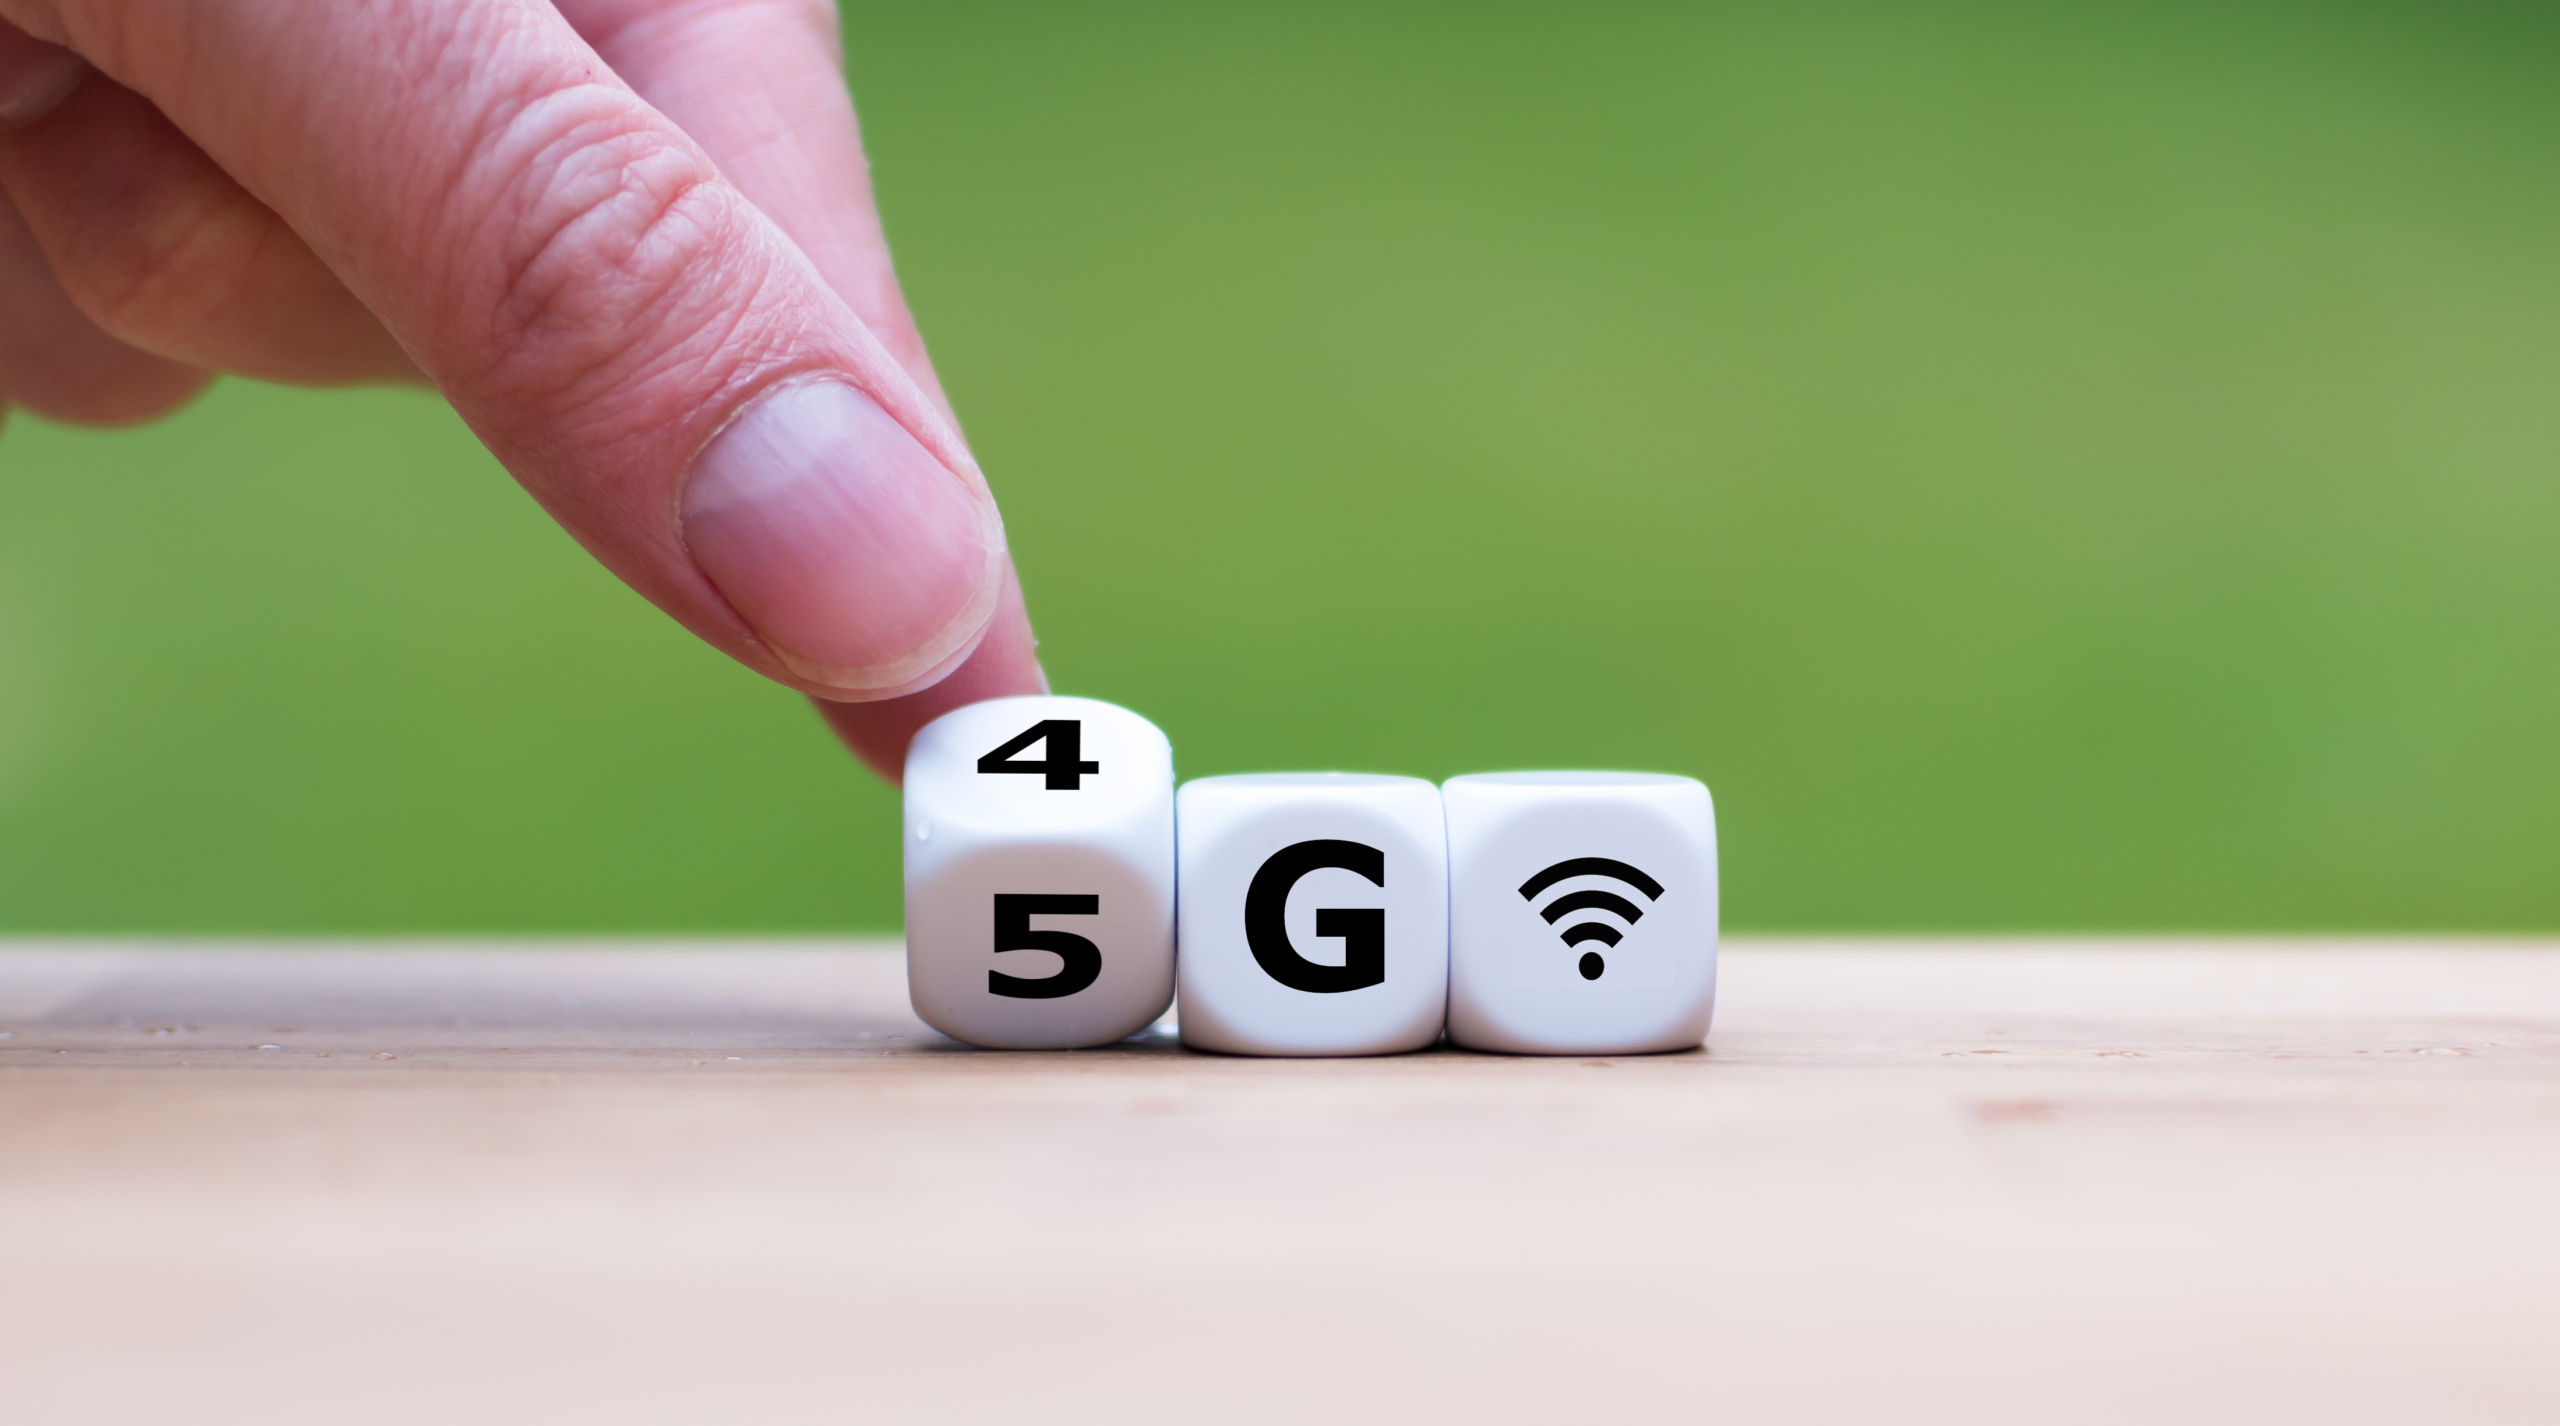 Evolution Of The Mobile G’s And The Future Of 4G LTE